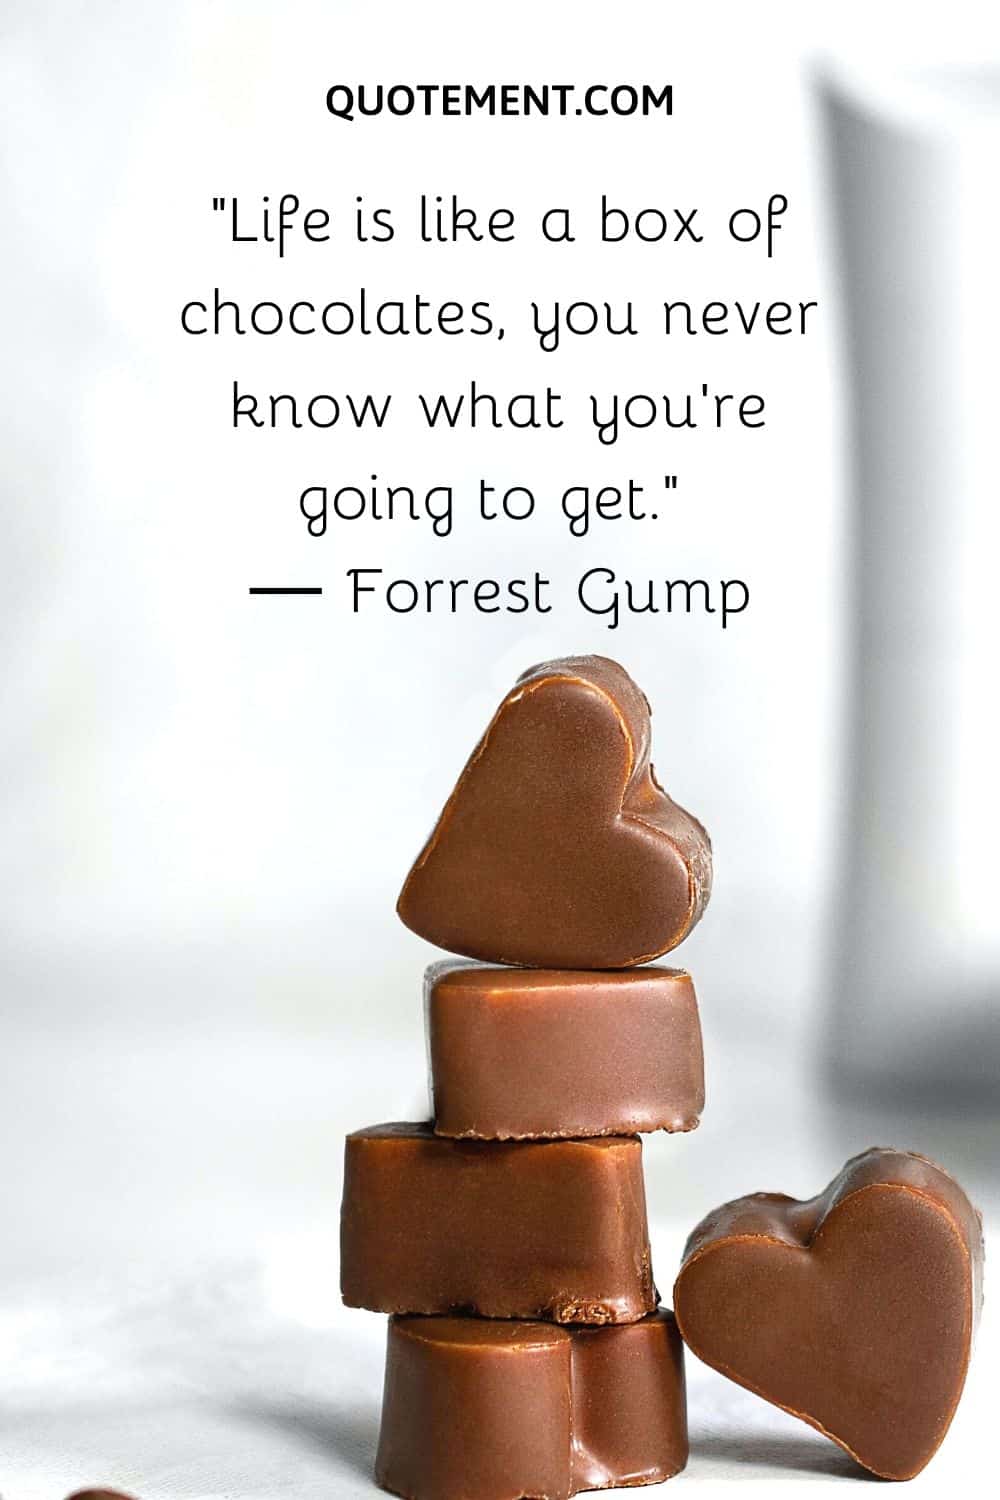 “Life is like a box of chocolates, you never know what you’re going to get.” ― Forrest Gump